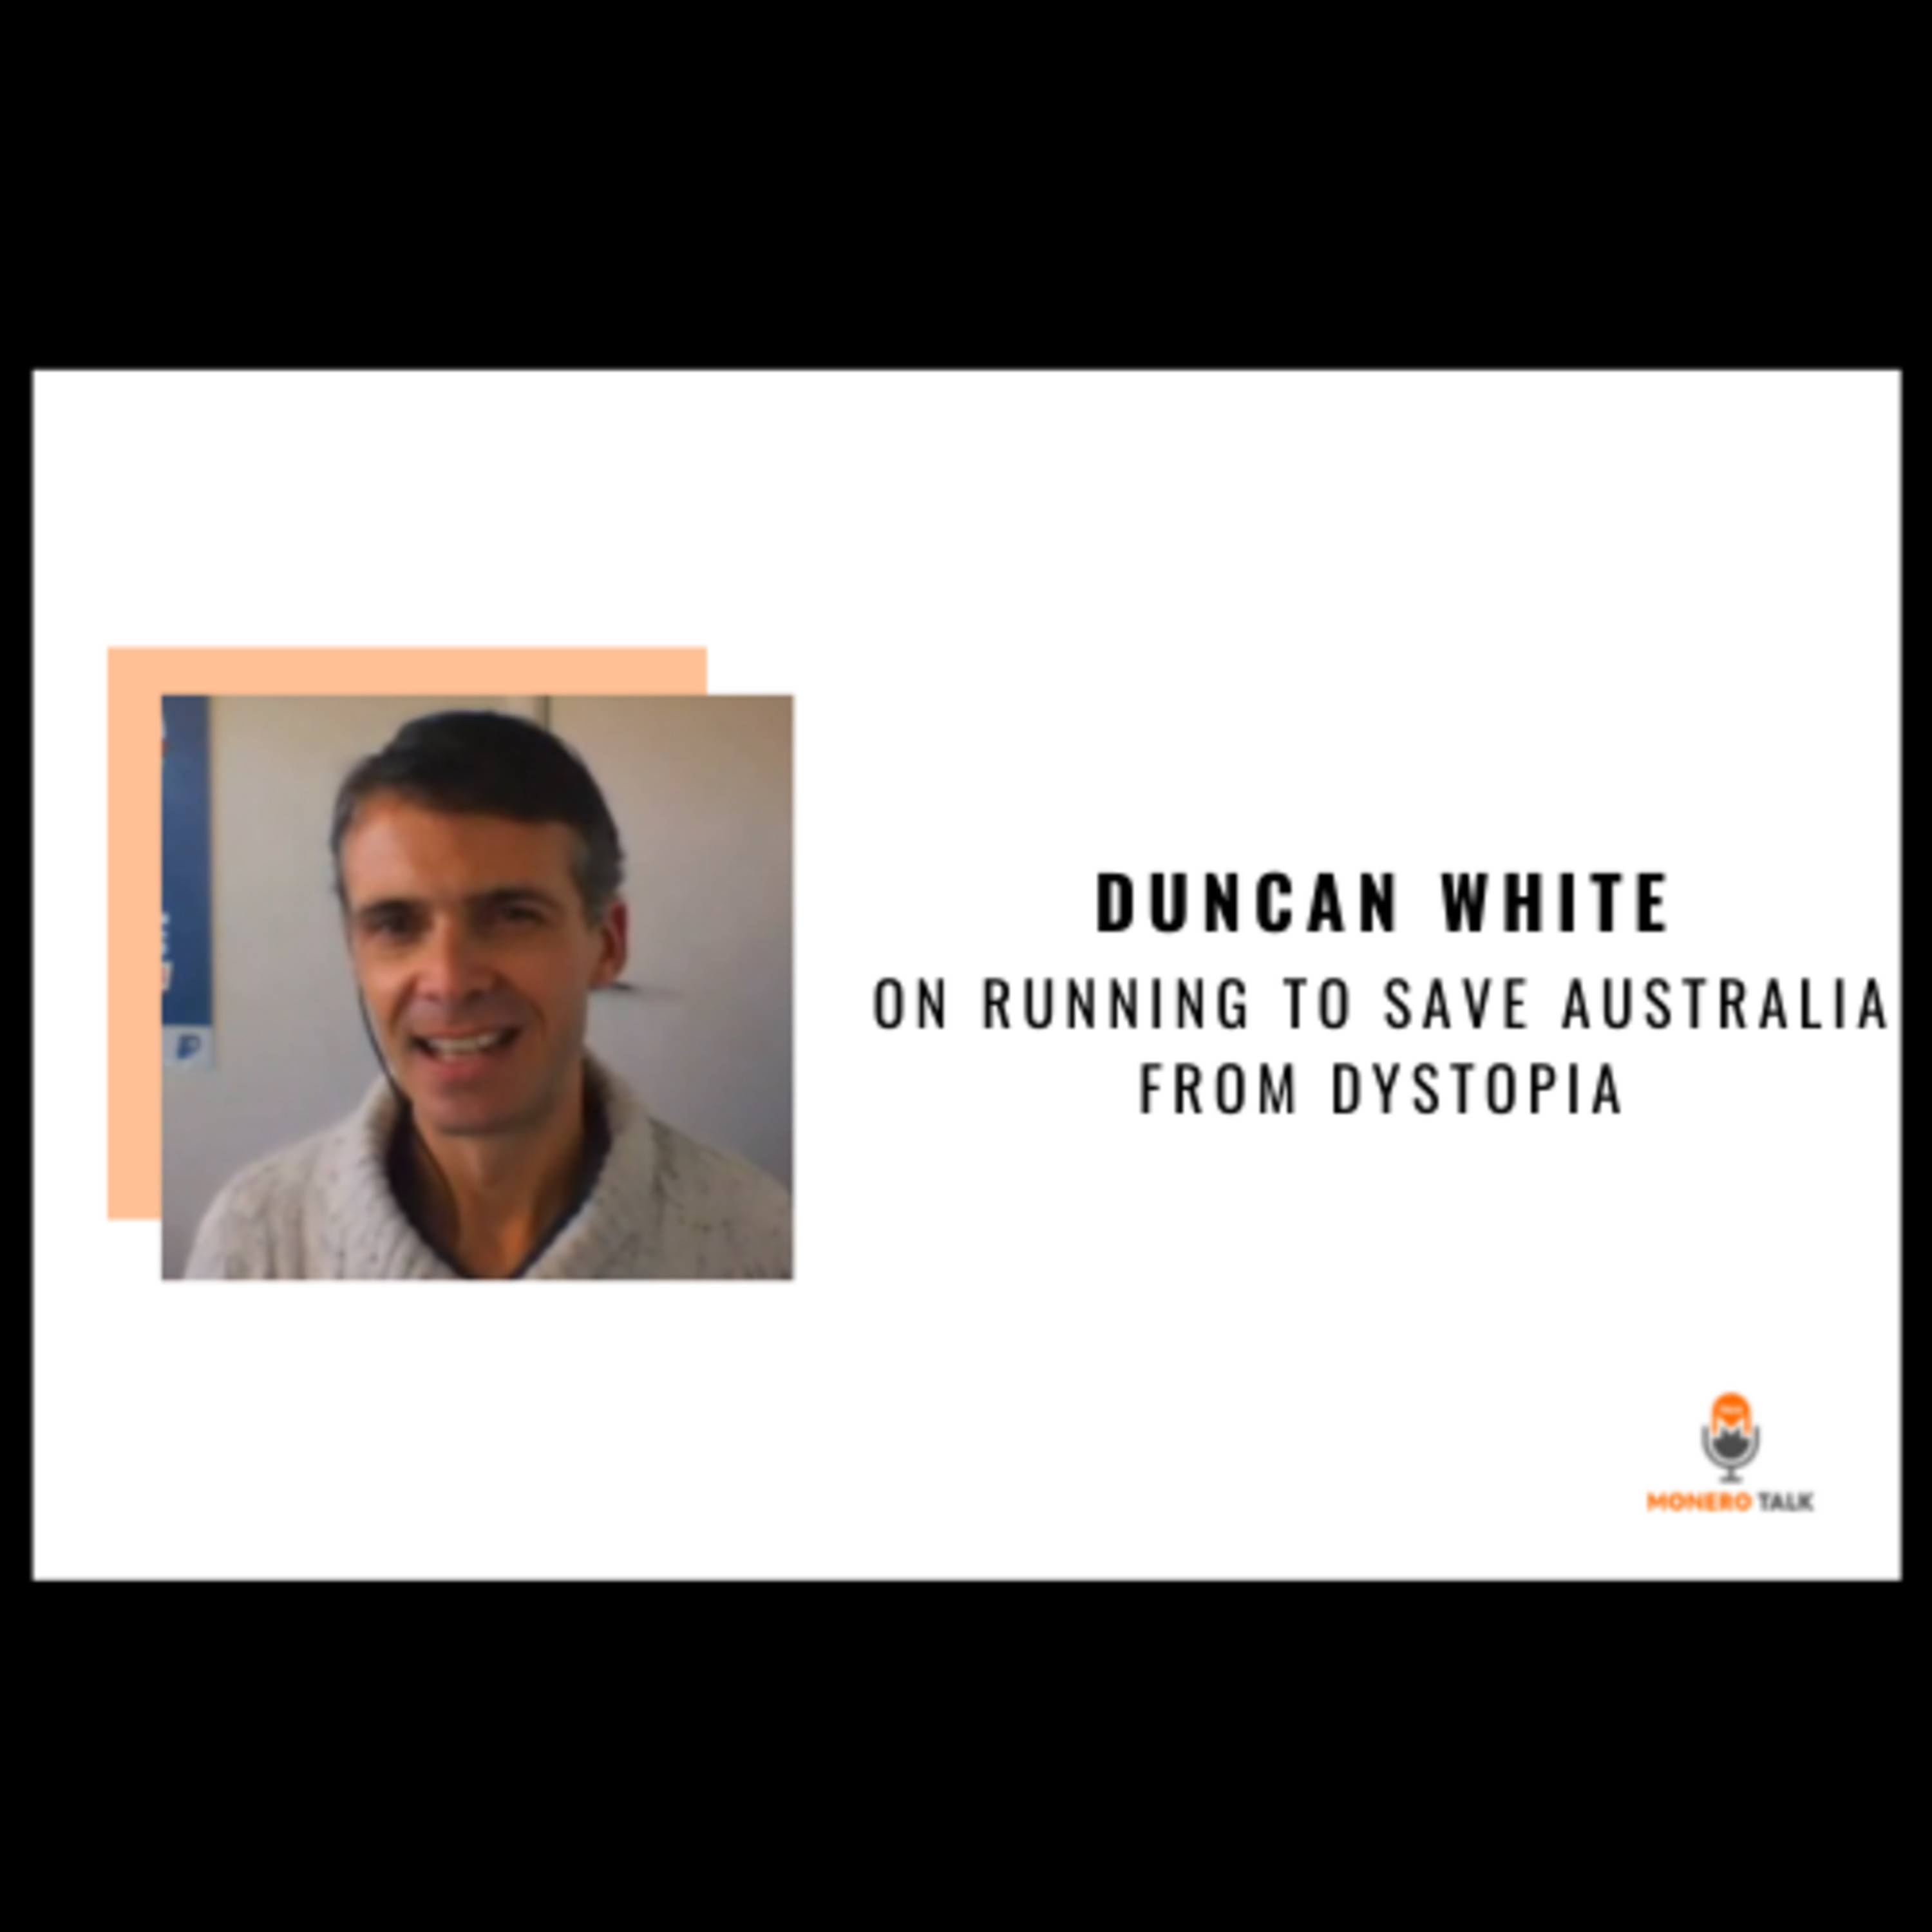 Duncan White on Running to Save Australia from Dystopia